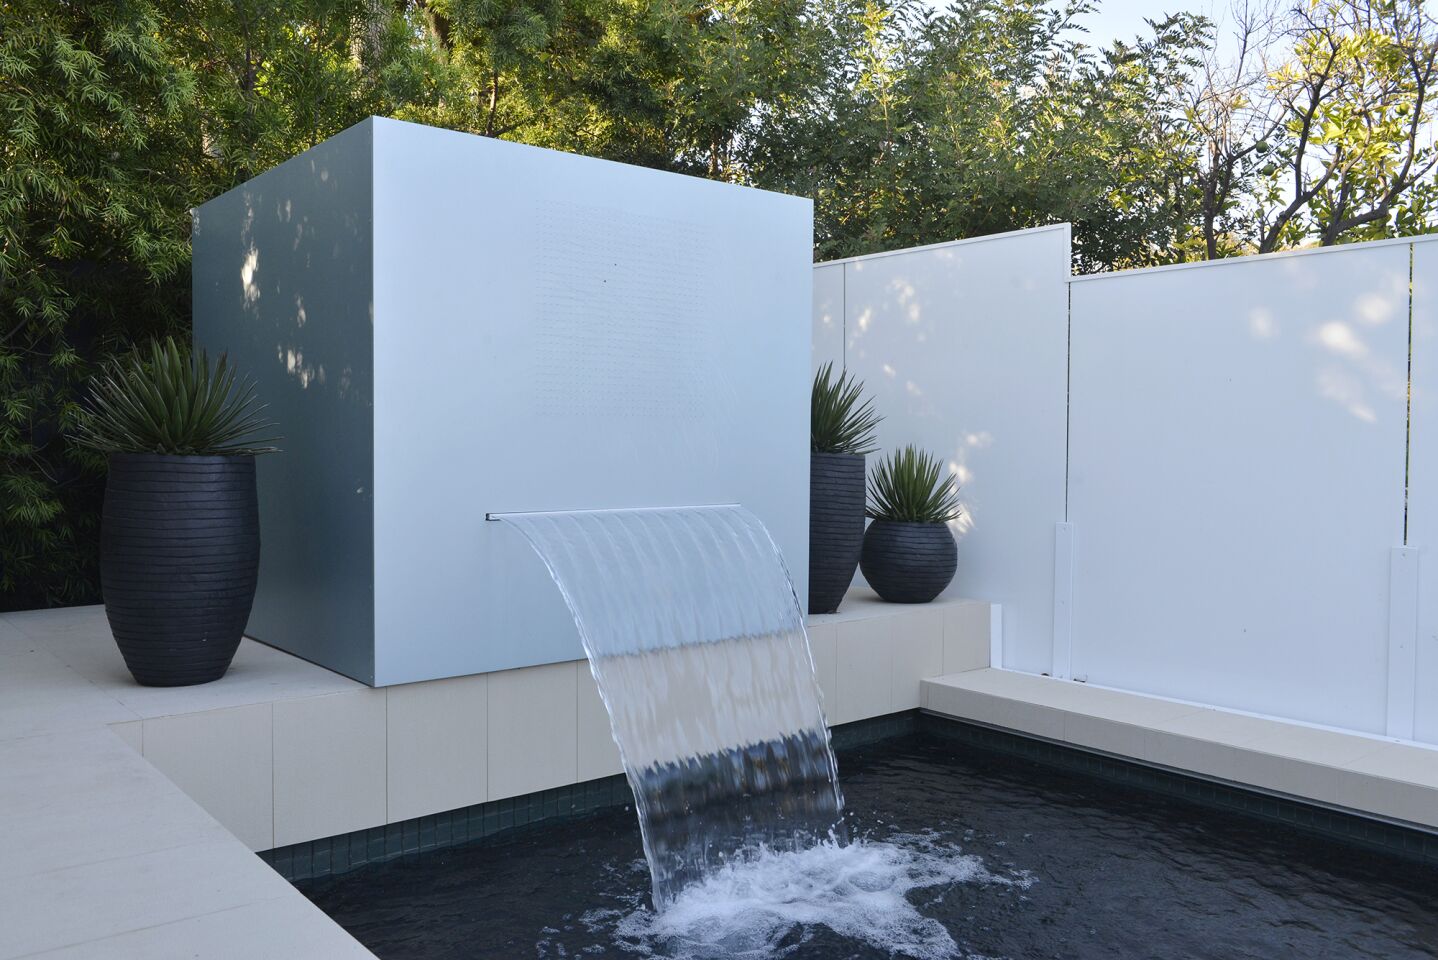 The fountain cube is an aluminum-covered concrete masonry unit.